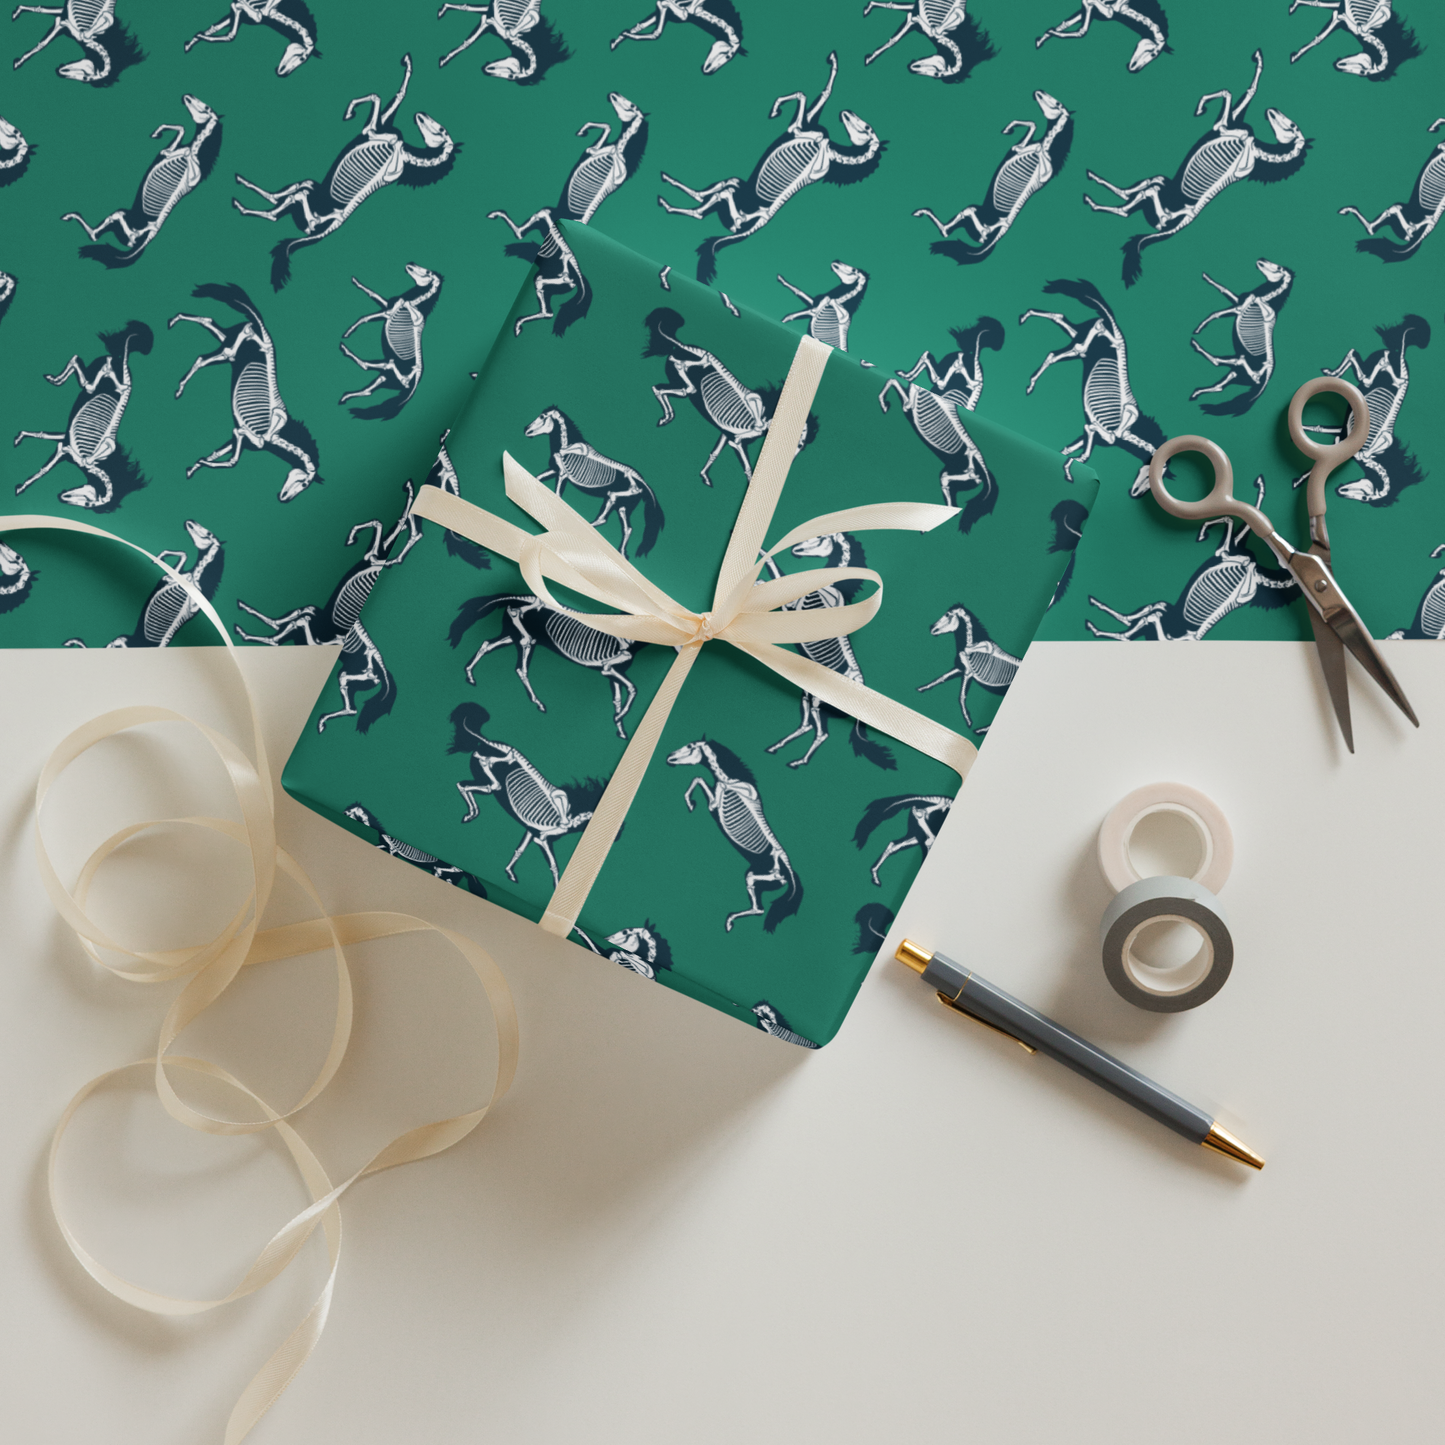 Horse Skeletons Navy & Green Wrapping Paper Sheets